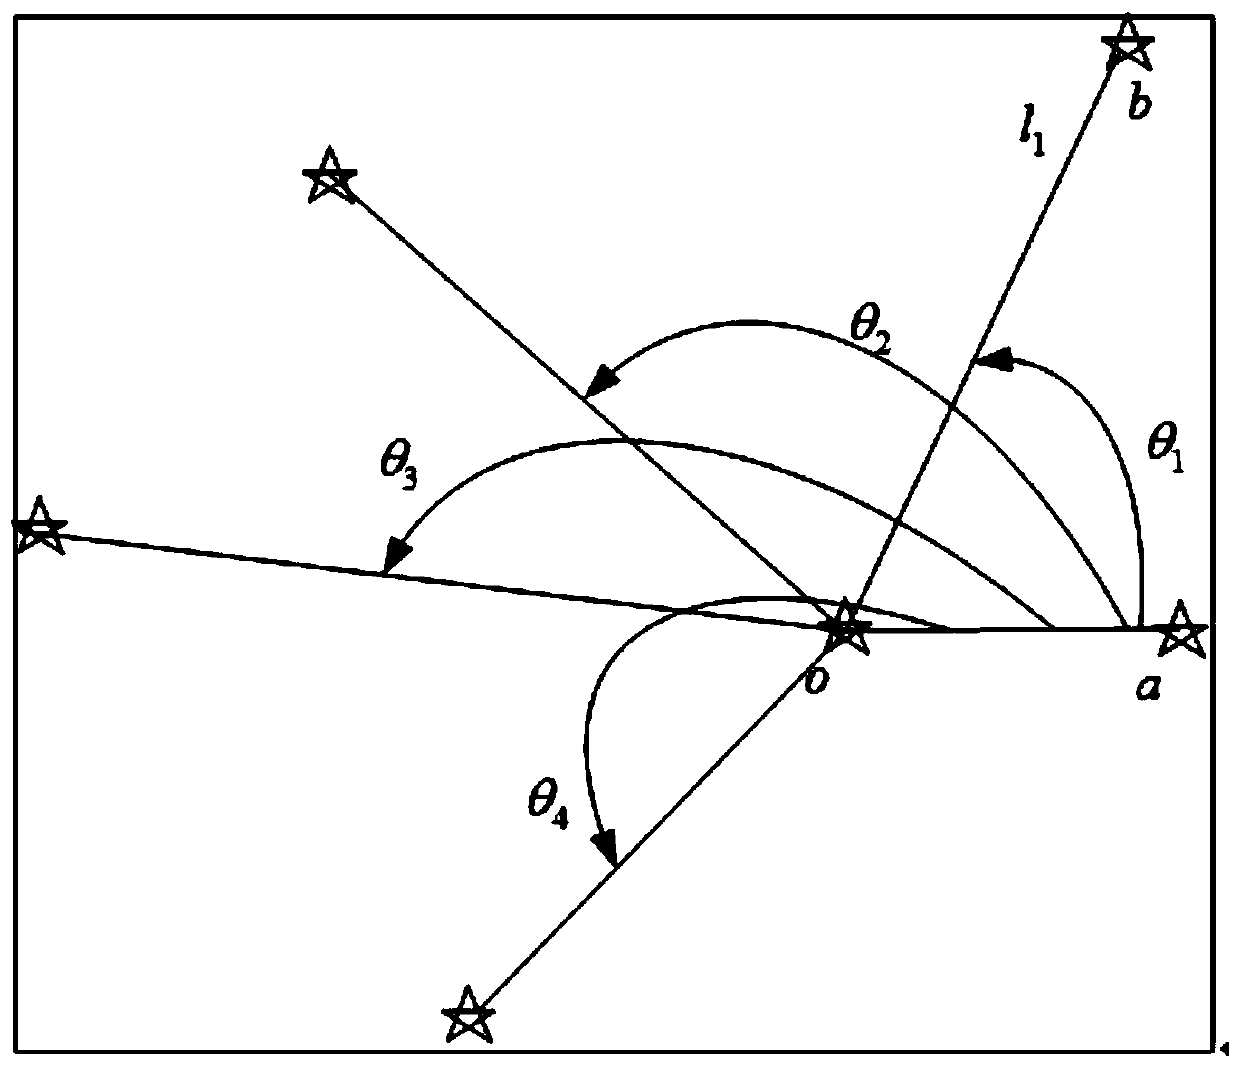 Autonomous star map identification method based on dimensionality reduction star catalogue